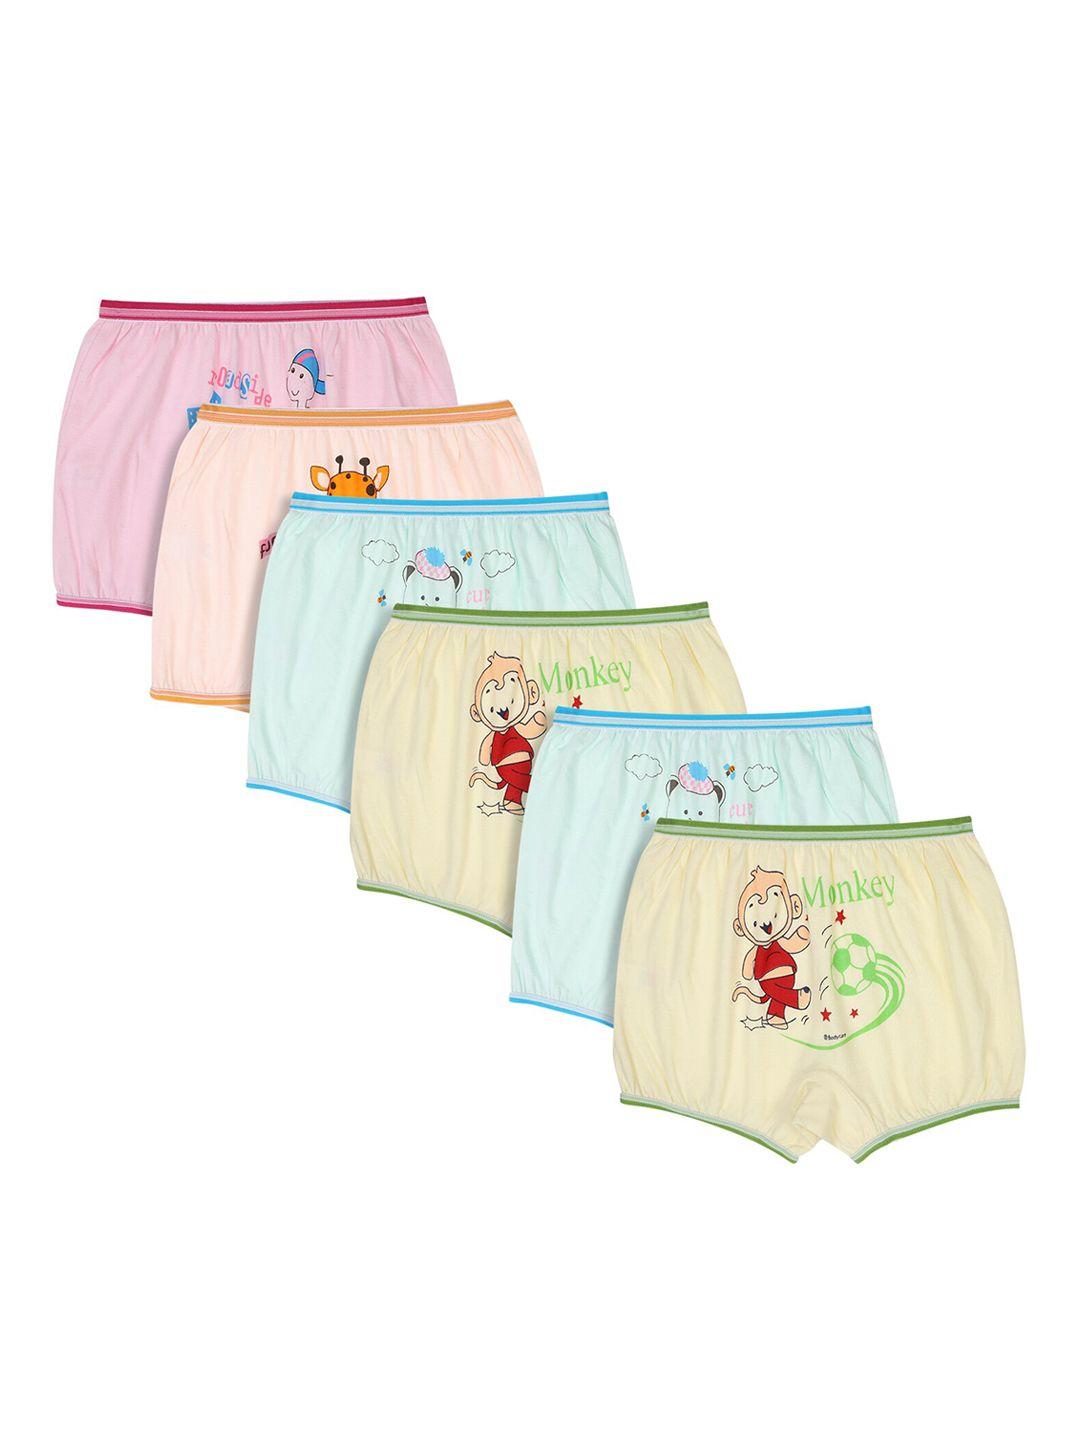 bodycare-pack-of-6-assorted-kids-infant-cotton-basic-briefs